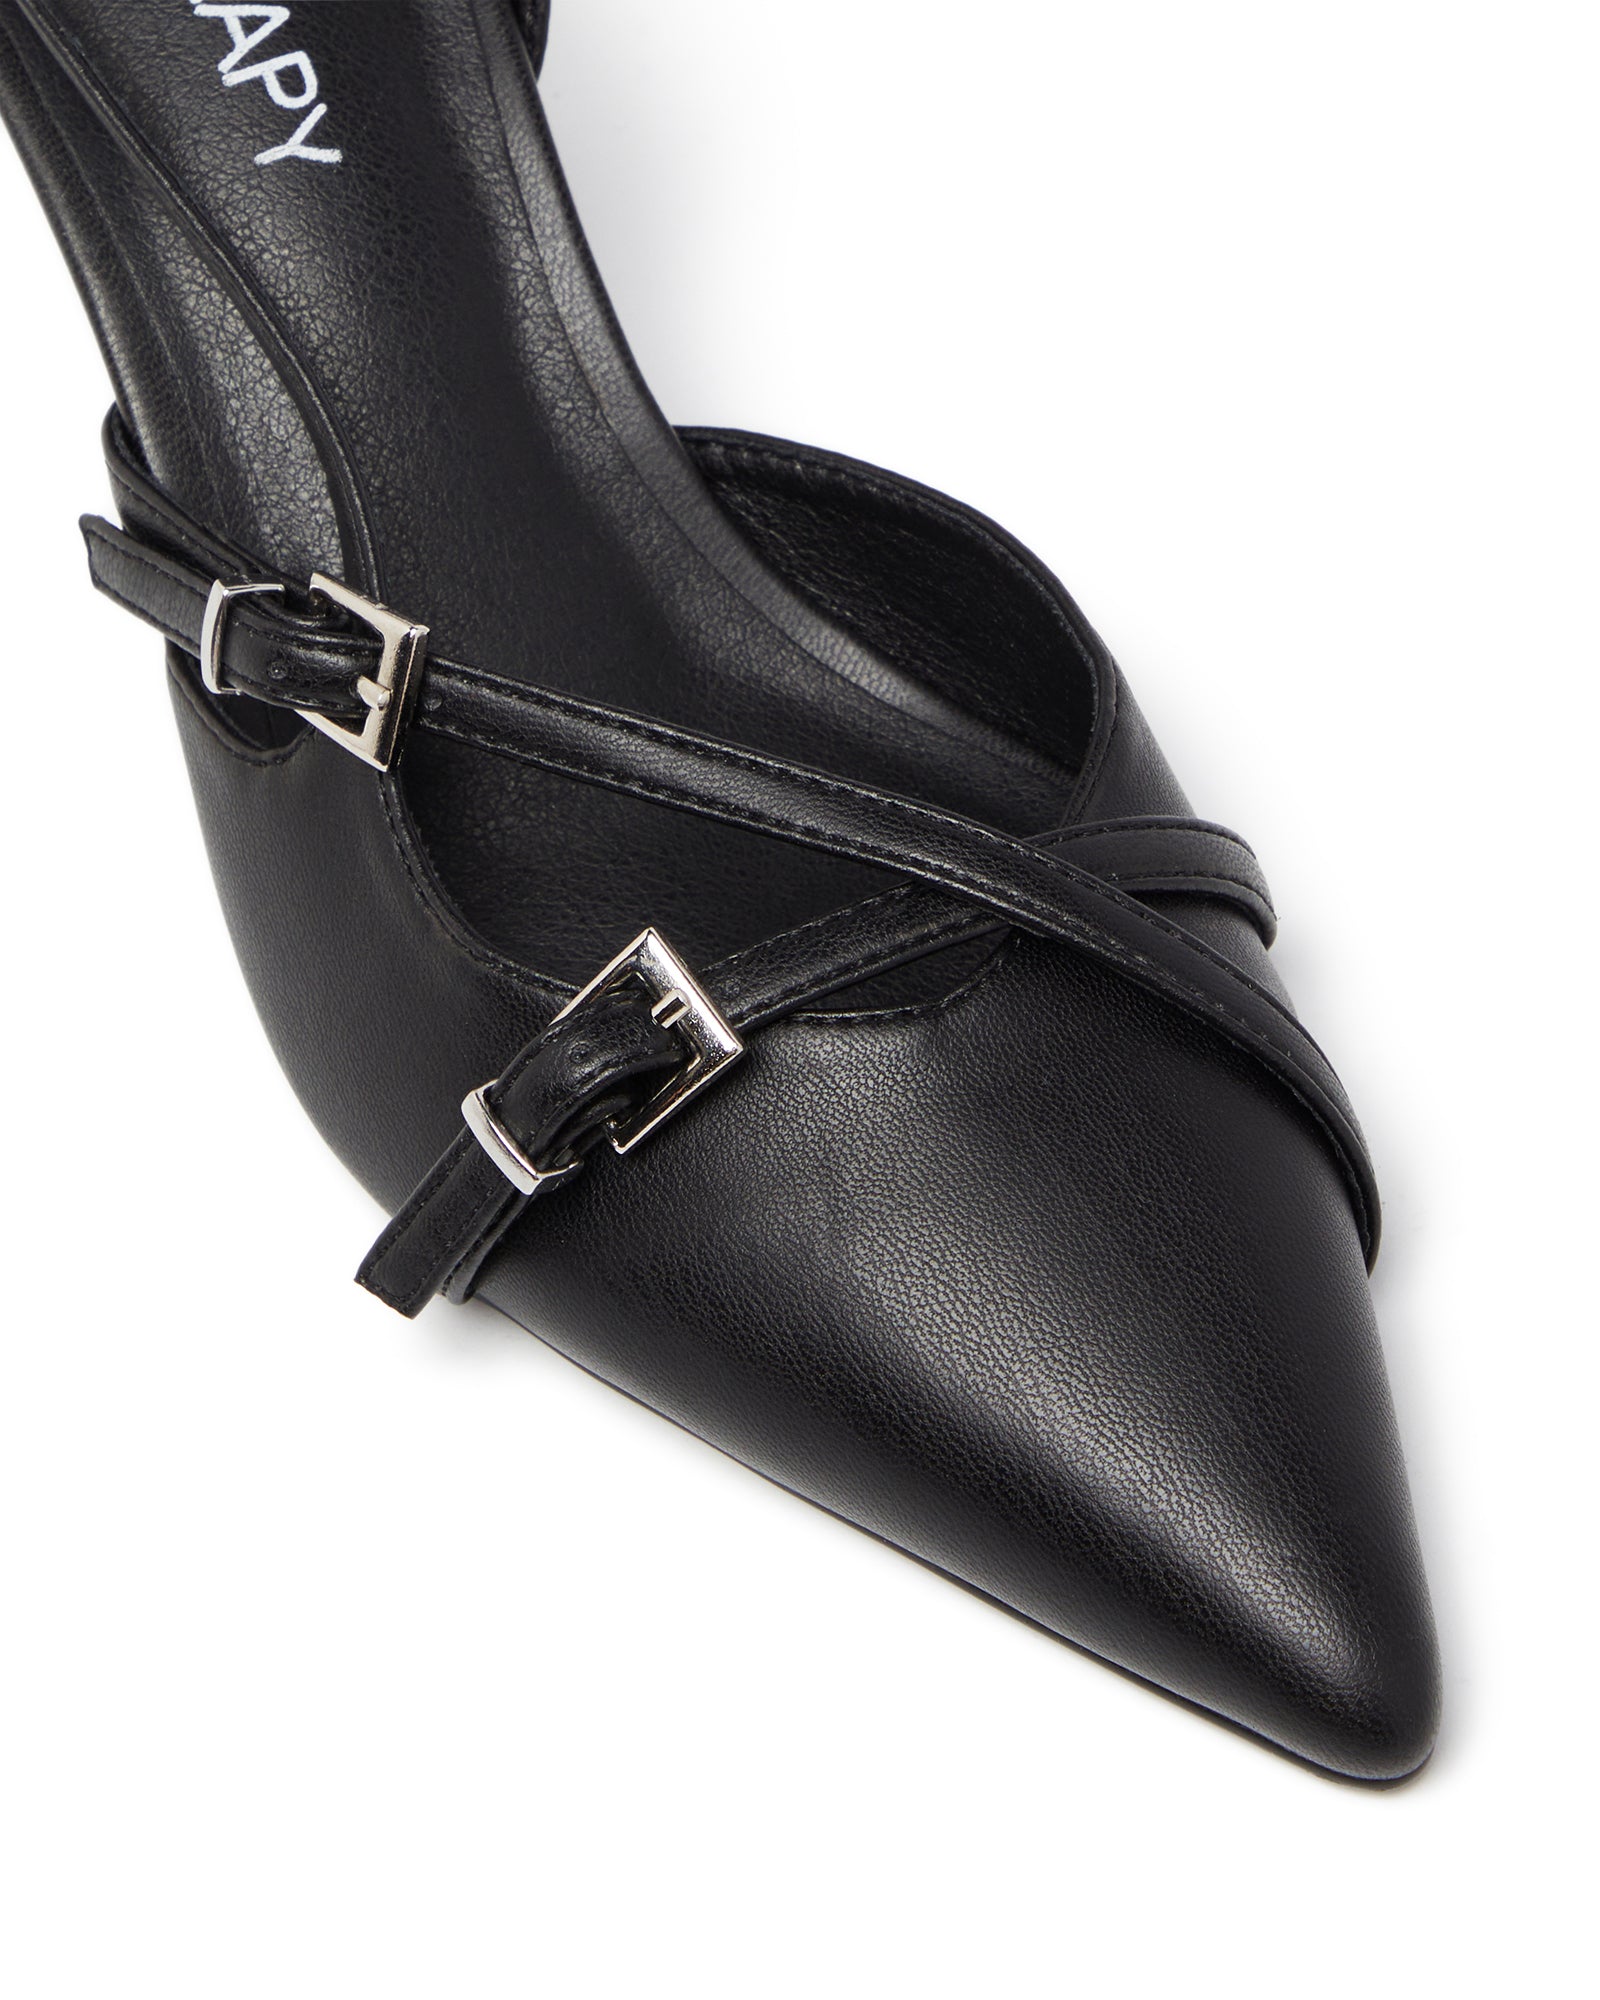 Therapy Shoes Juicy Black Smooth | Women's Heels | Slingback | Pump | Stiletto